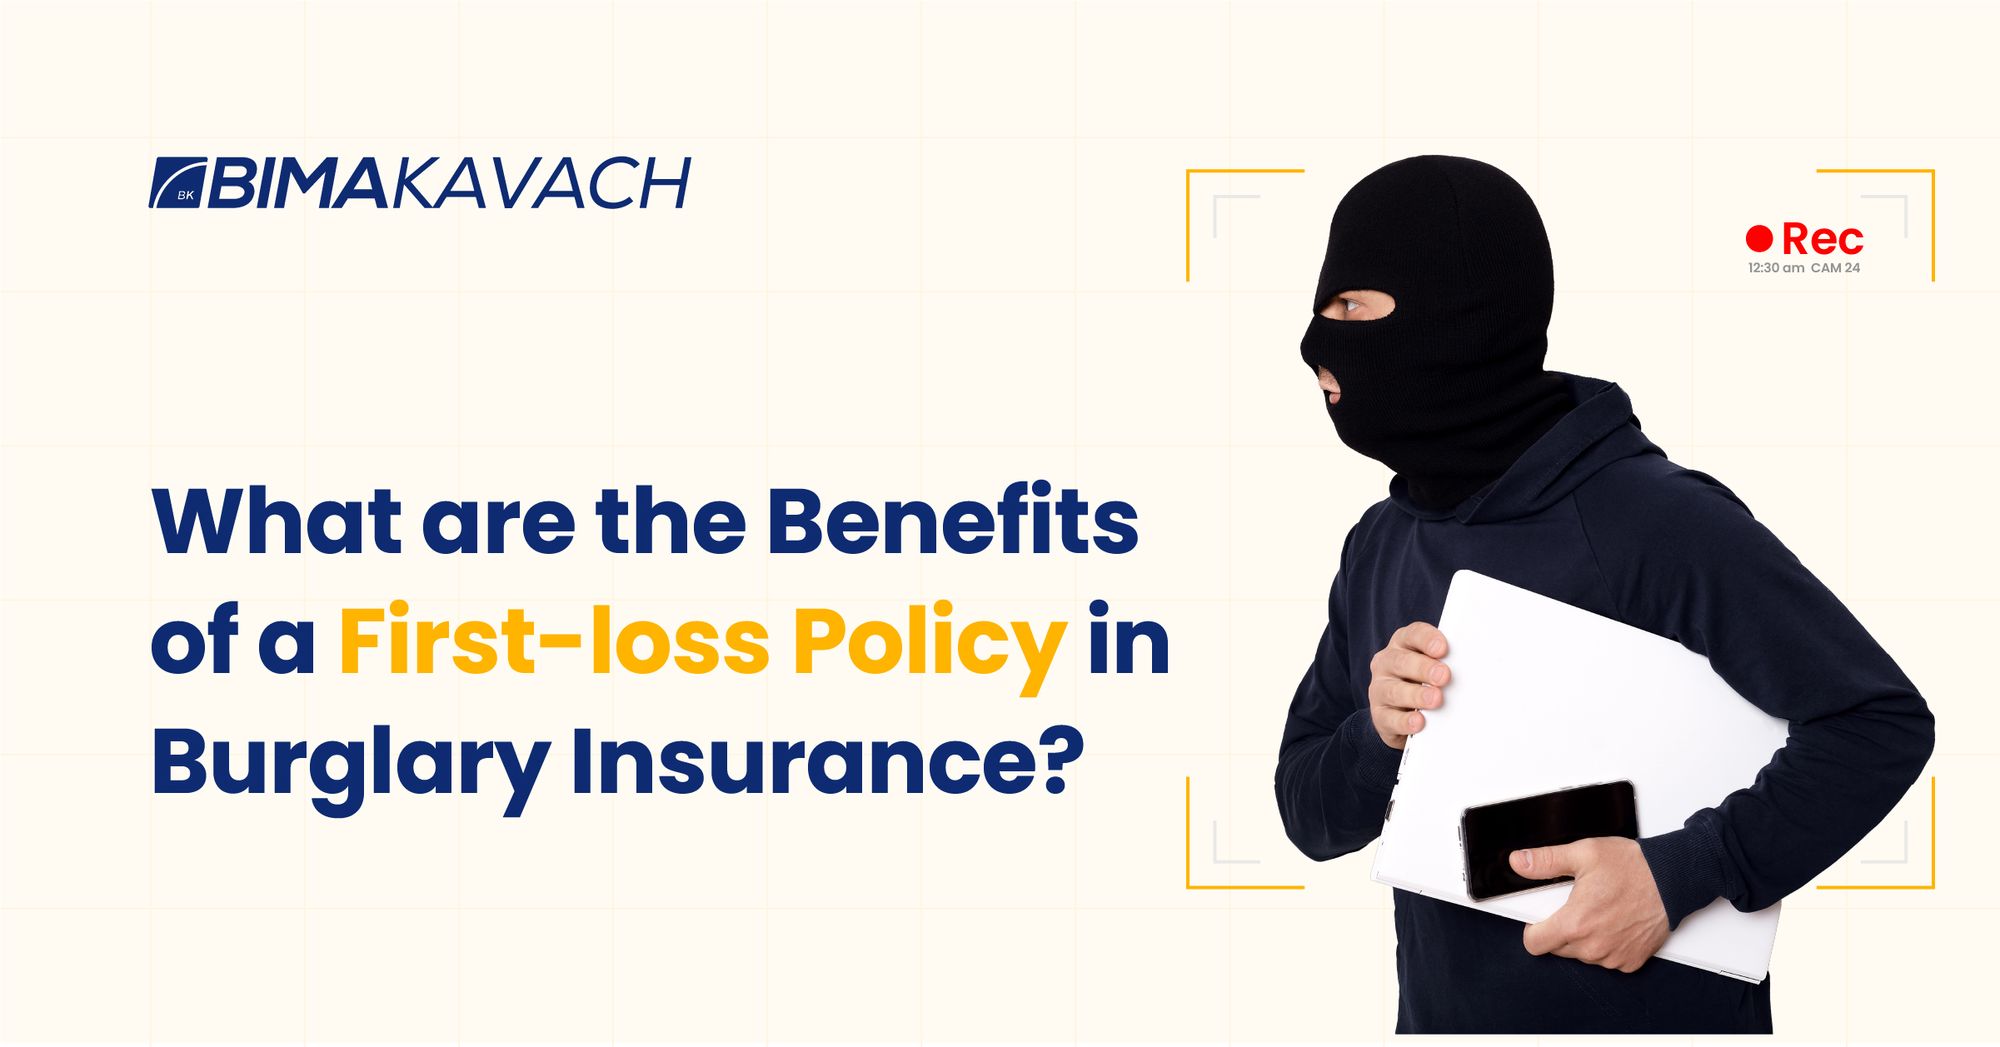 What are the benefits of a first-loss policy in Burglary insurance?